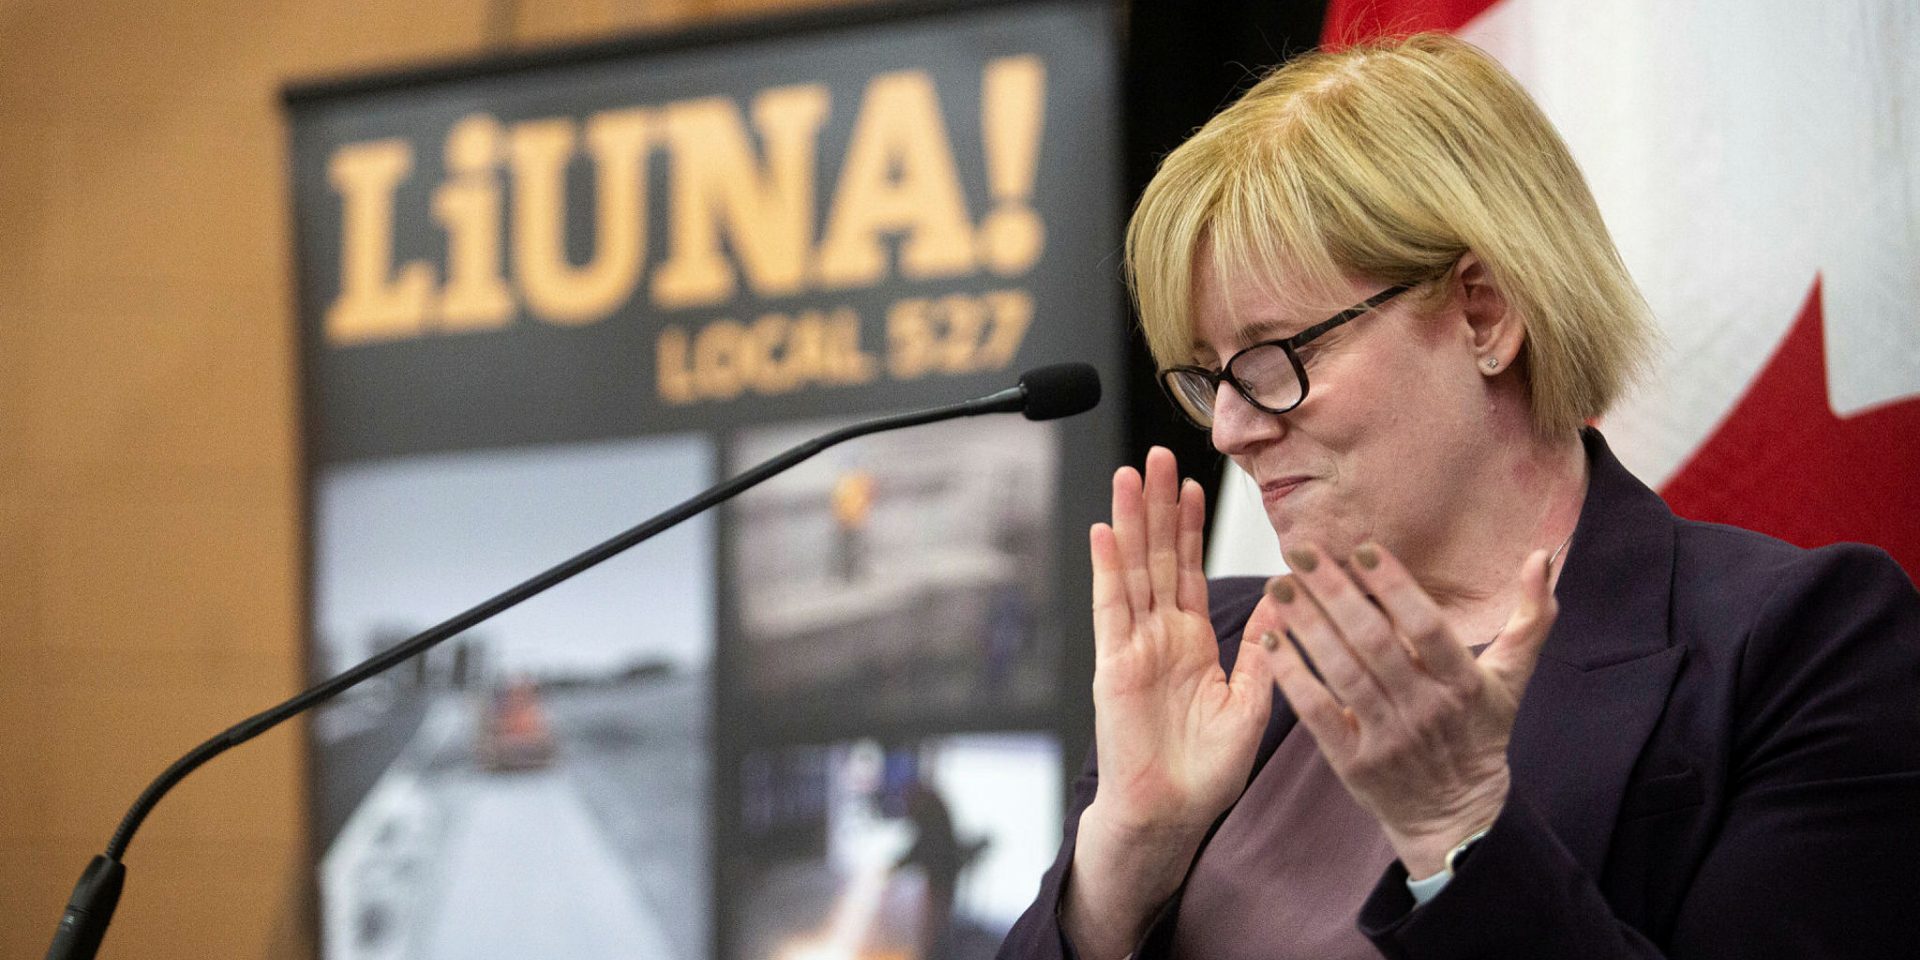 Minister of Employment, Workforce Development and Disability Inclusion Carla Qualtrough makes an announcement at the LiUNA local 527 training centre on  Nov. 17, 2022, outlining funding for apprenticeship programs in the skilled trades. The Hill Times photograph by Andrew Meade